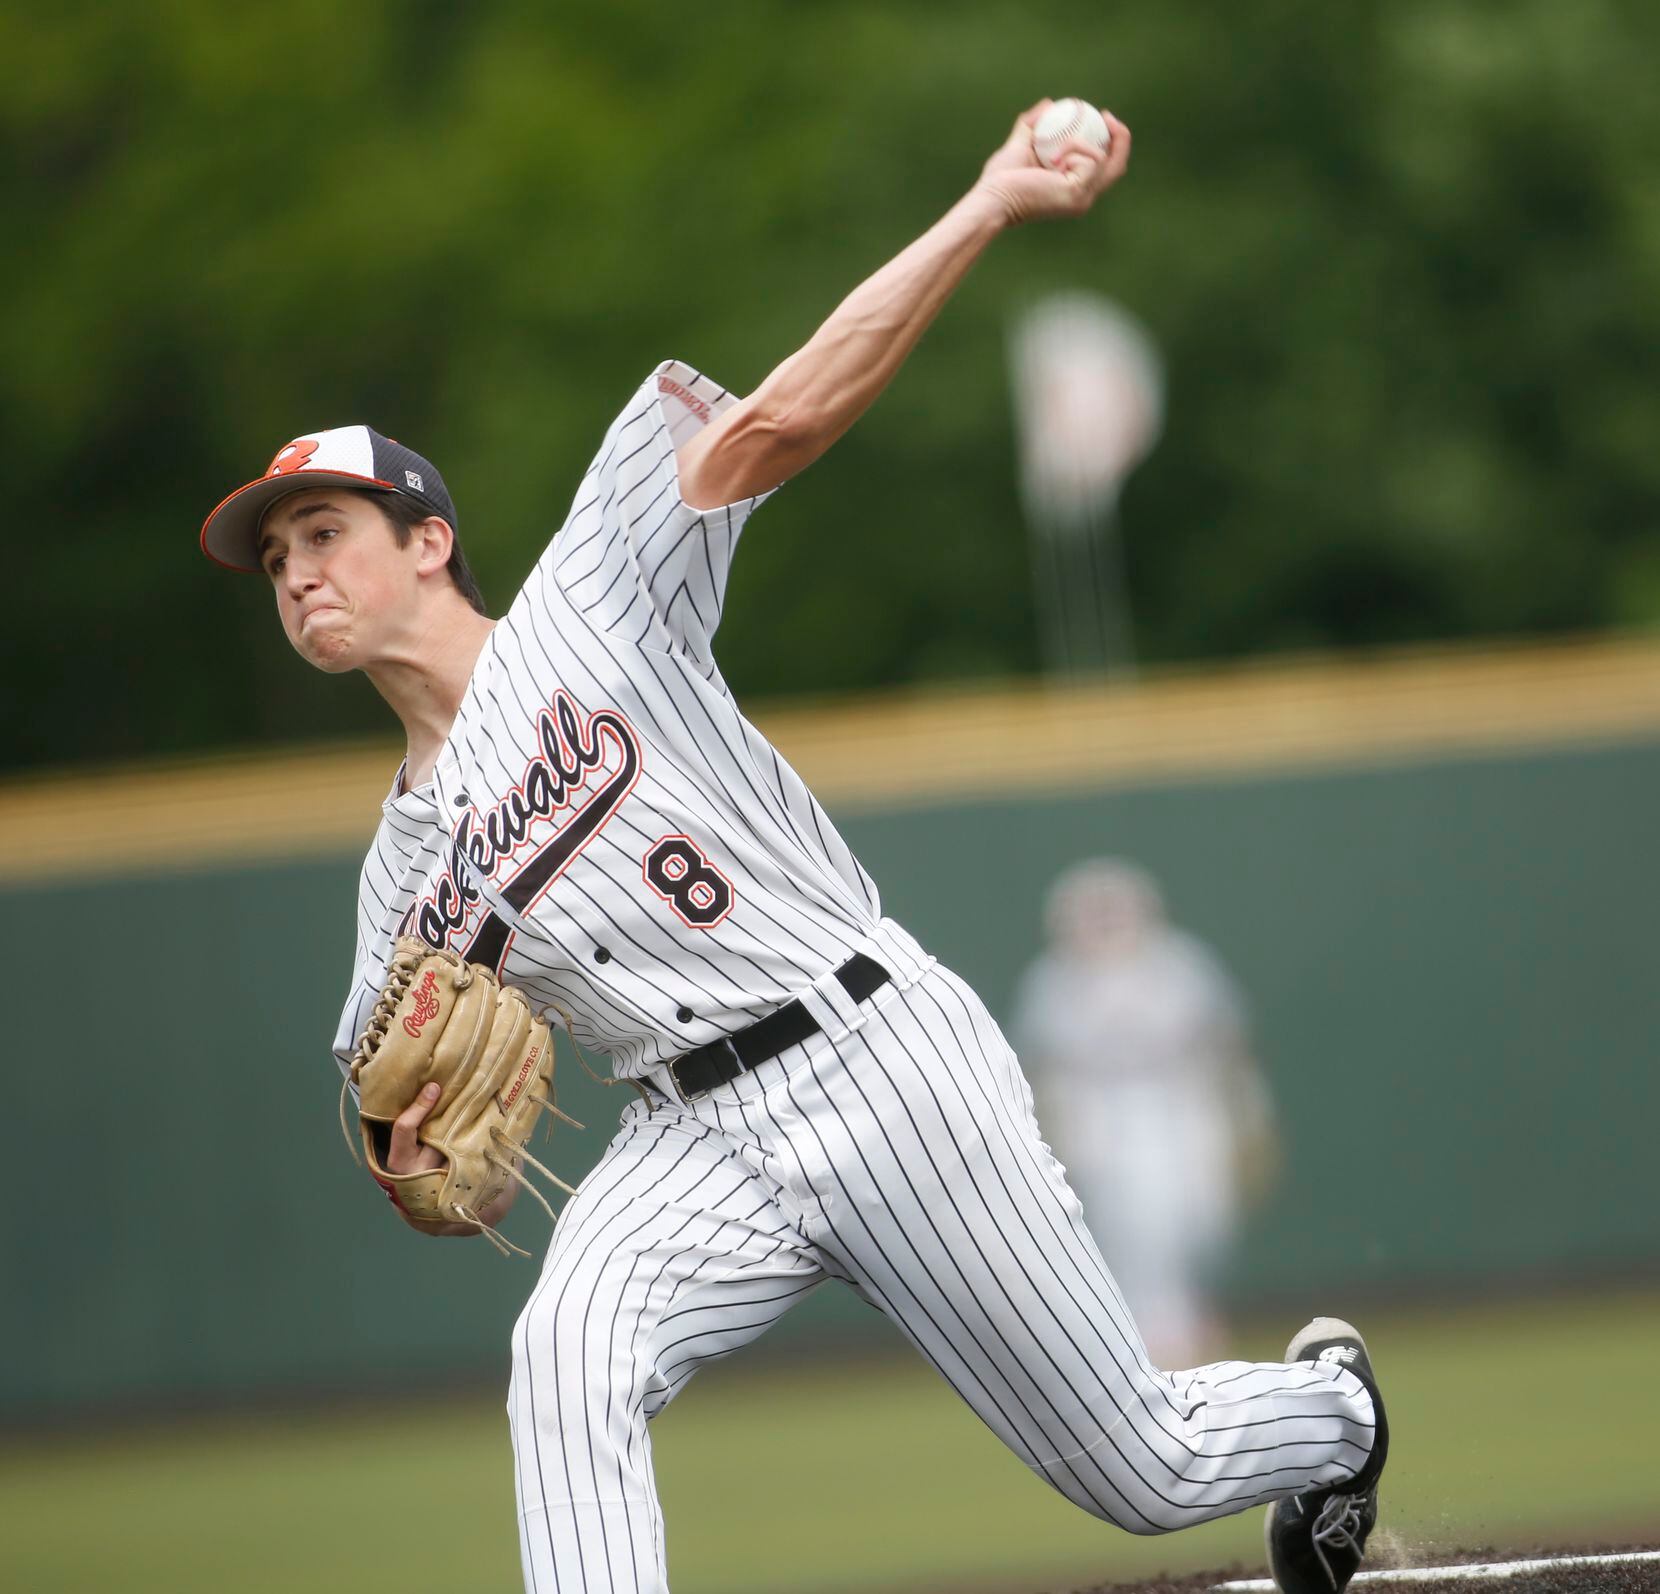 Rockwall pitcher Cade Crossland (8) delivers a pitch during the bottom of the 5th inning of...